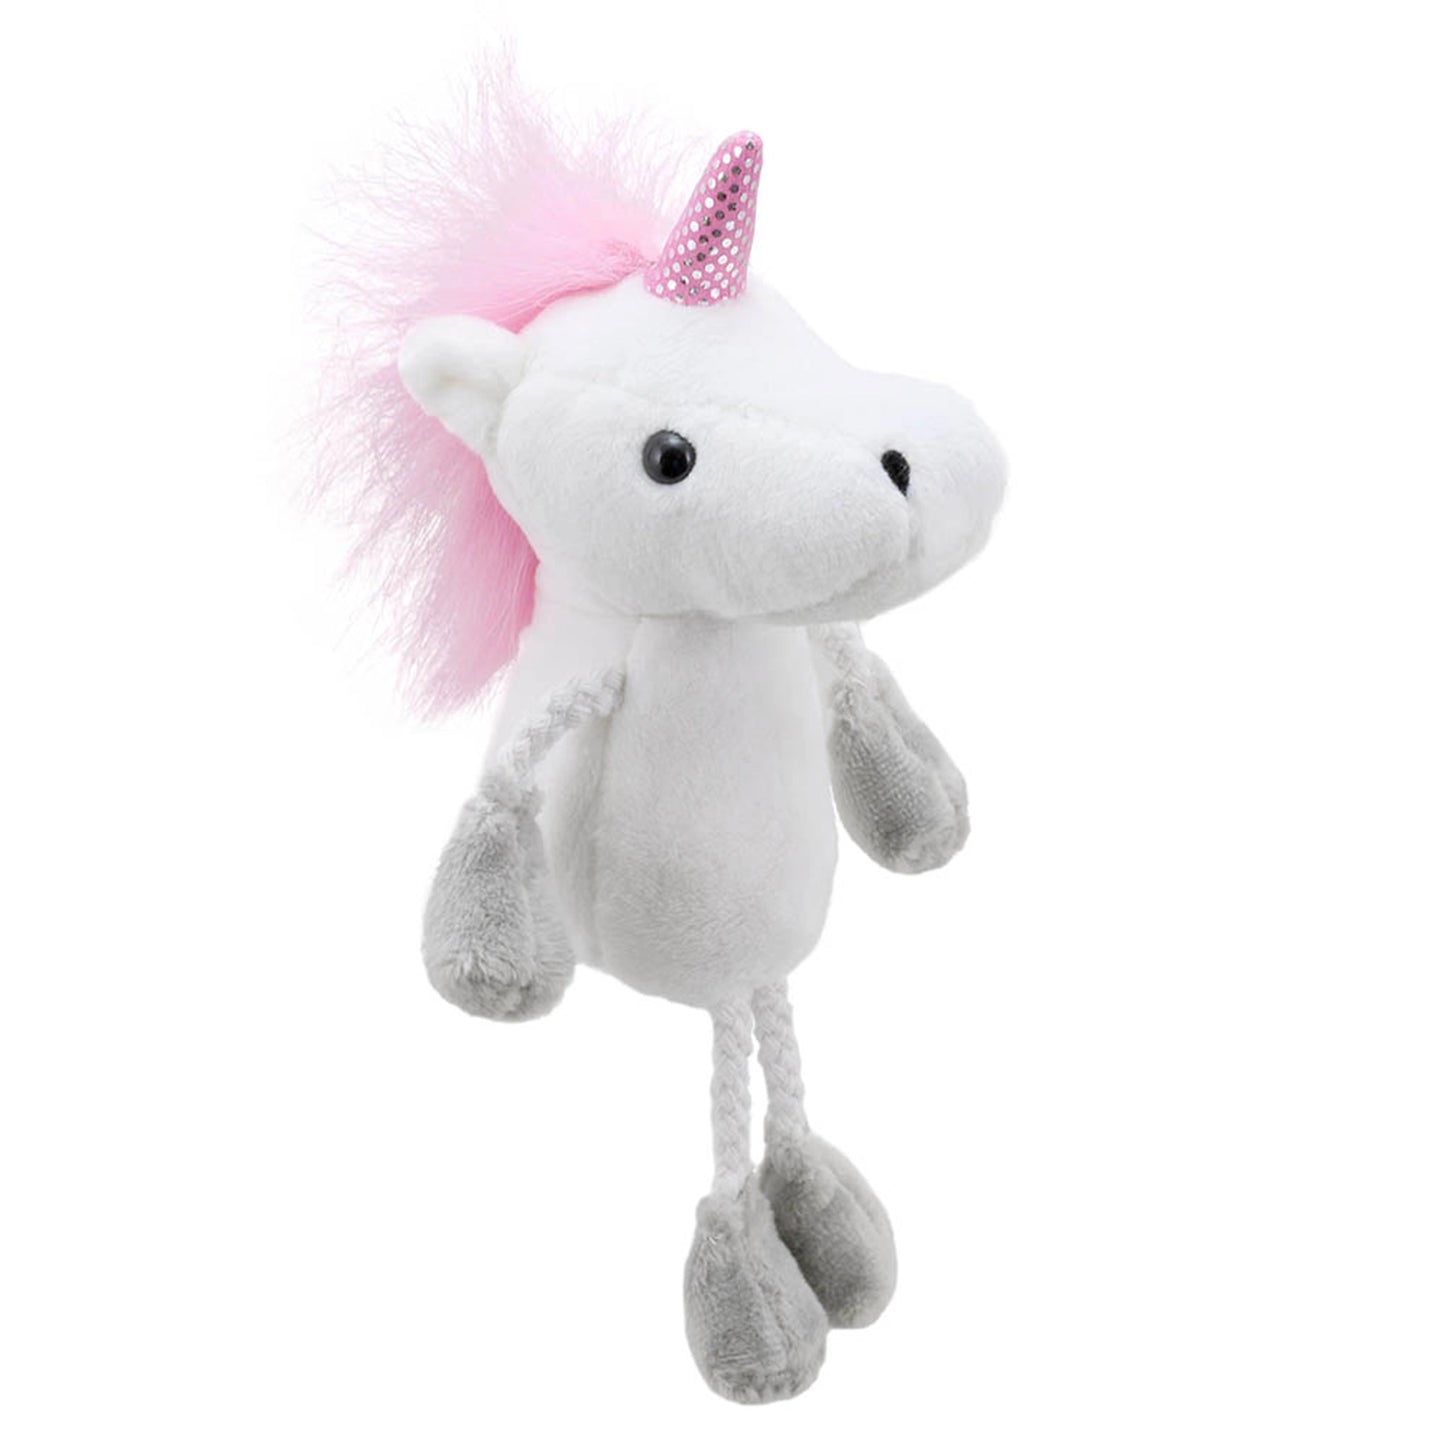 Unicorn Finger Puppet - The Puppet Company - The Forgotten Toy Shop